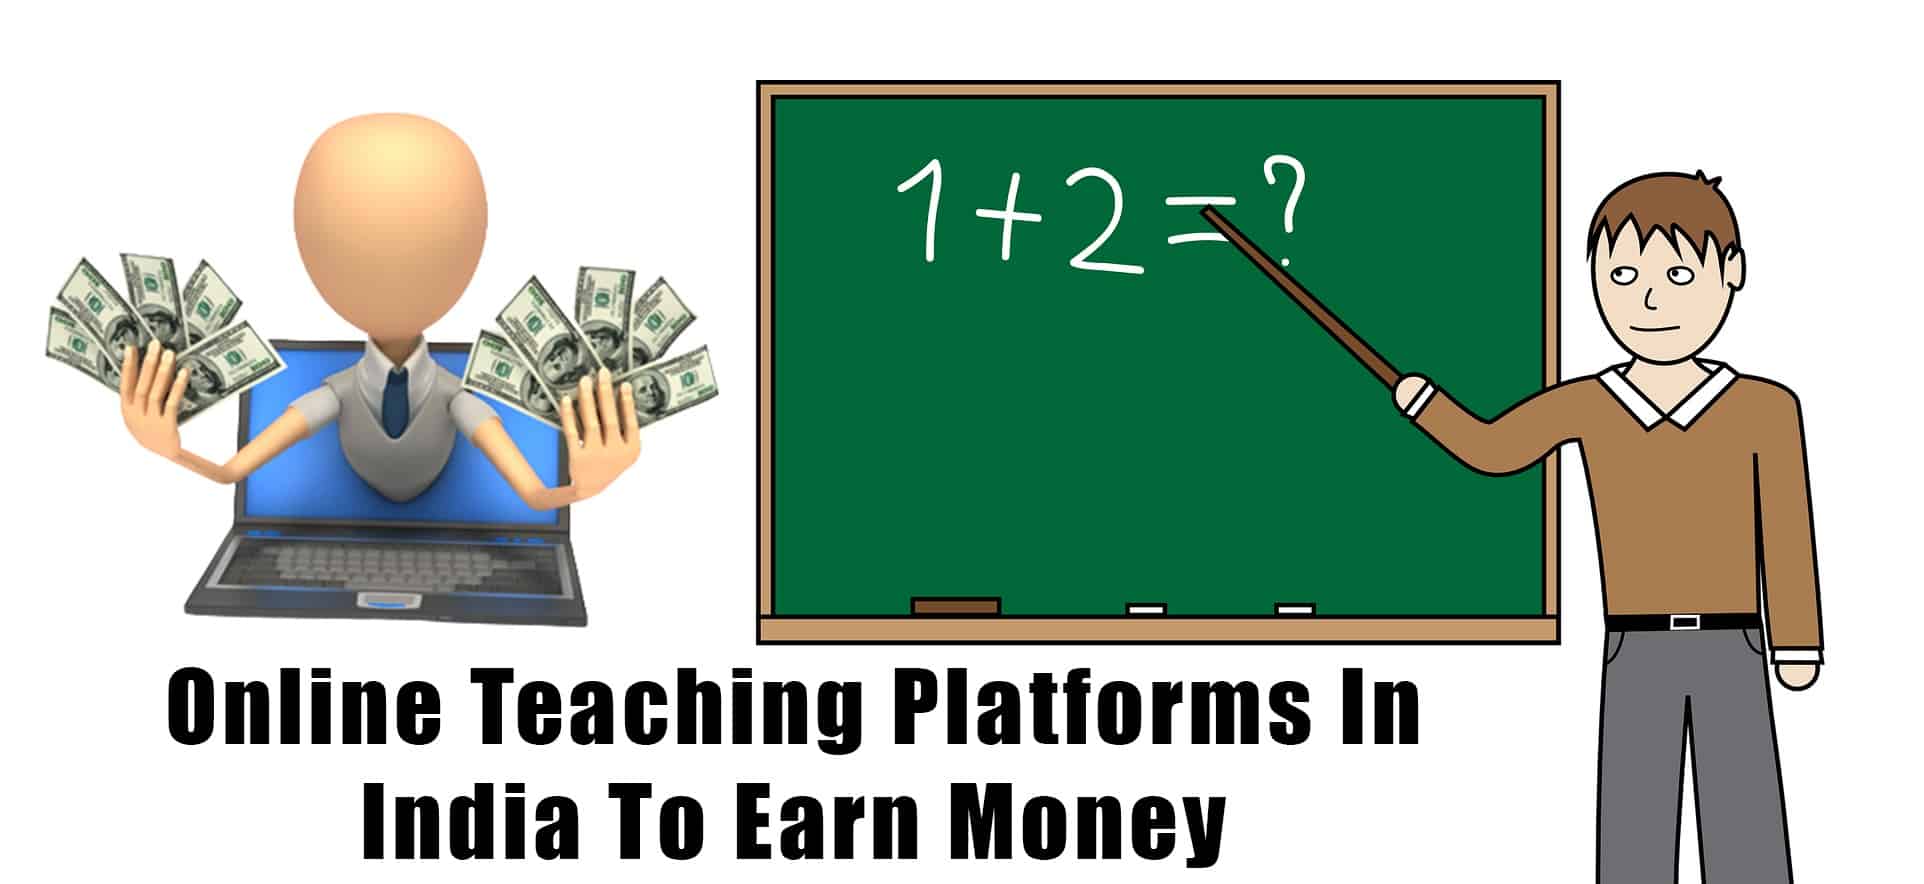 Online Teaching Platforms In India To Earn Money